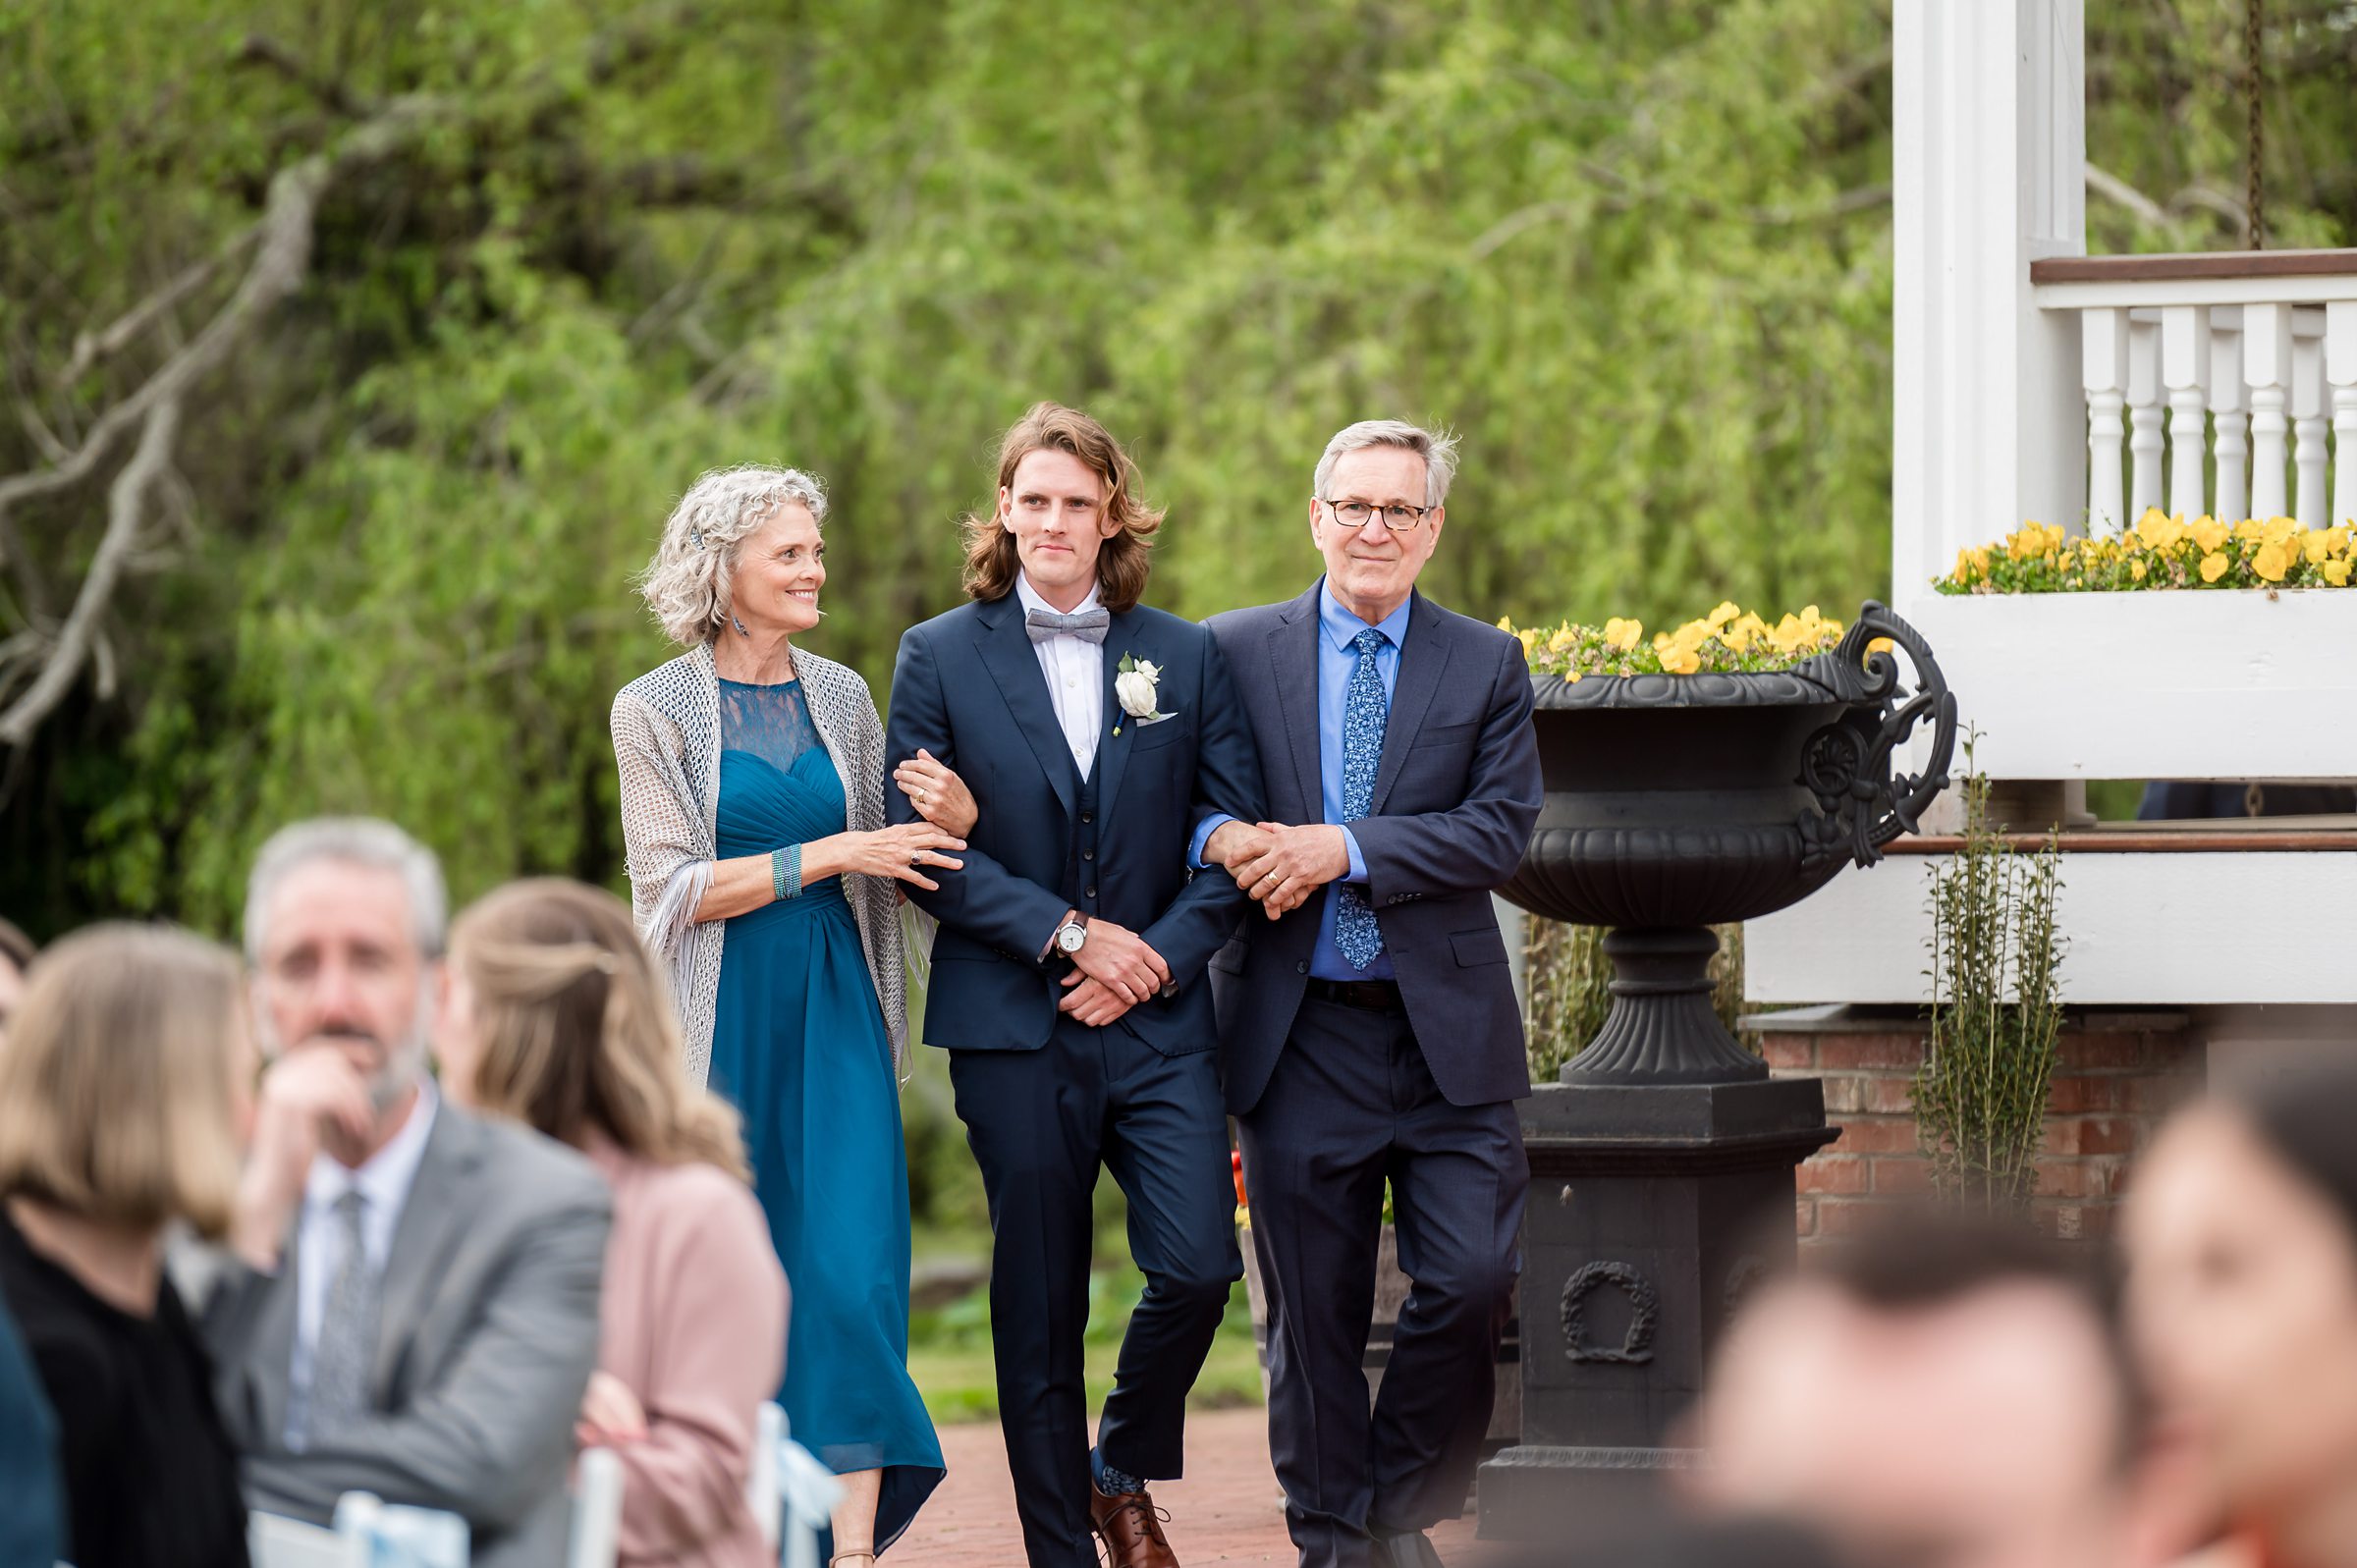 A groom walks down an outdoor aisle arm-in-arm with a woman and a man, surrounded by seated guests in a garden setting.